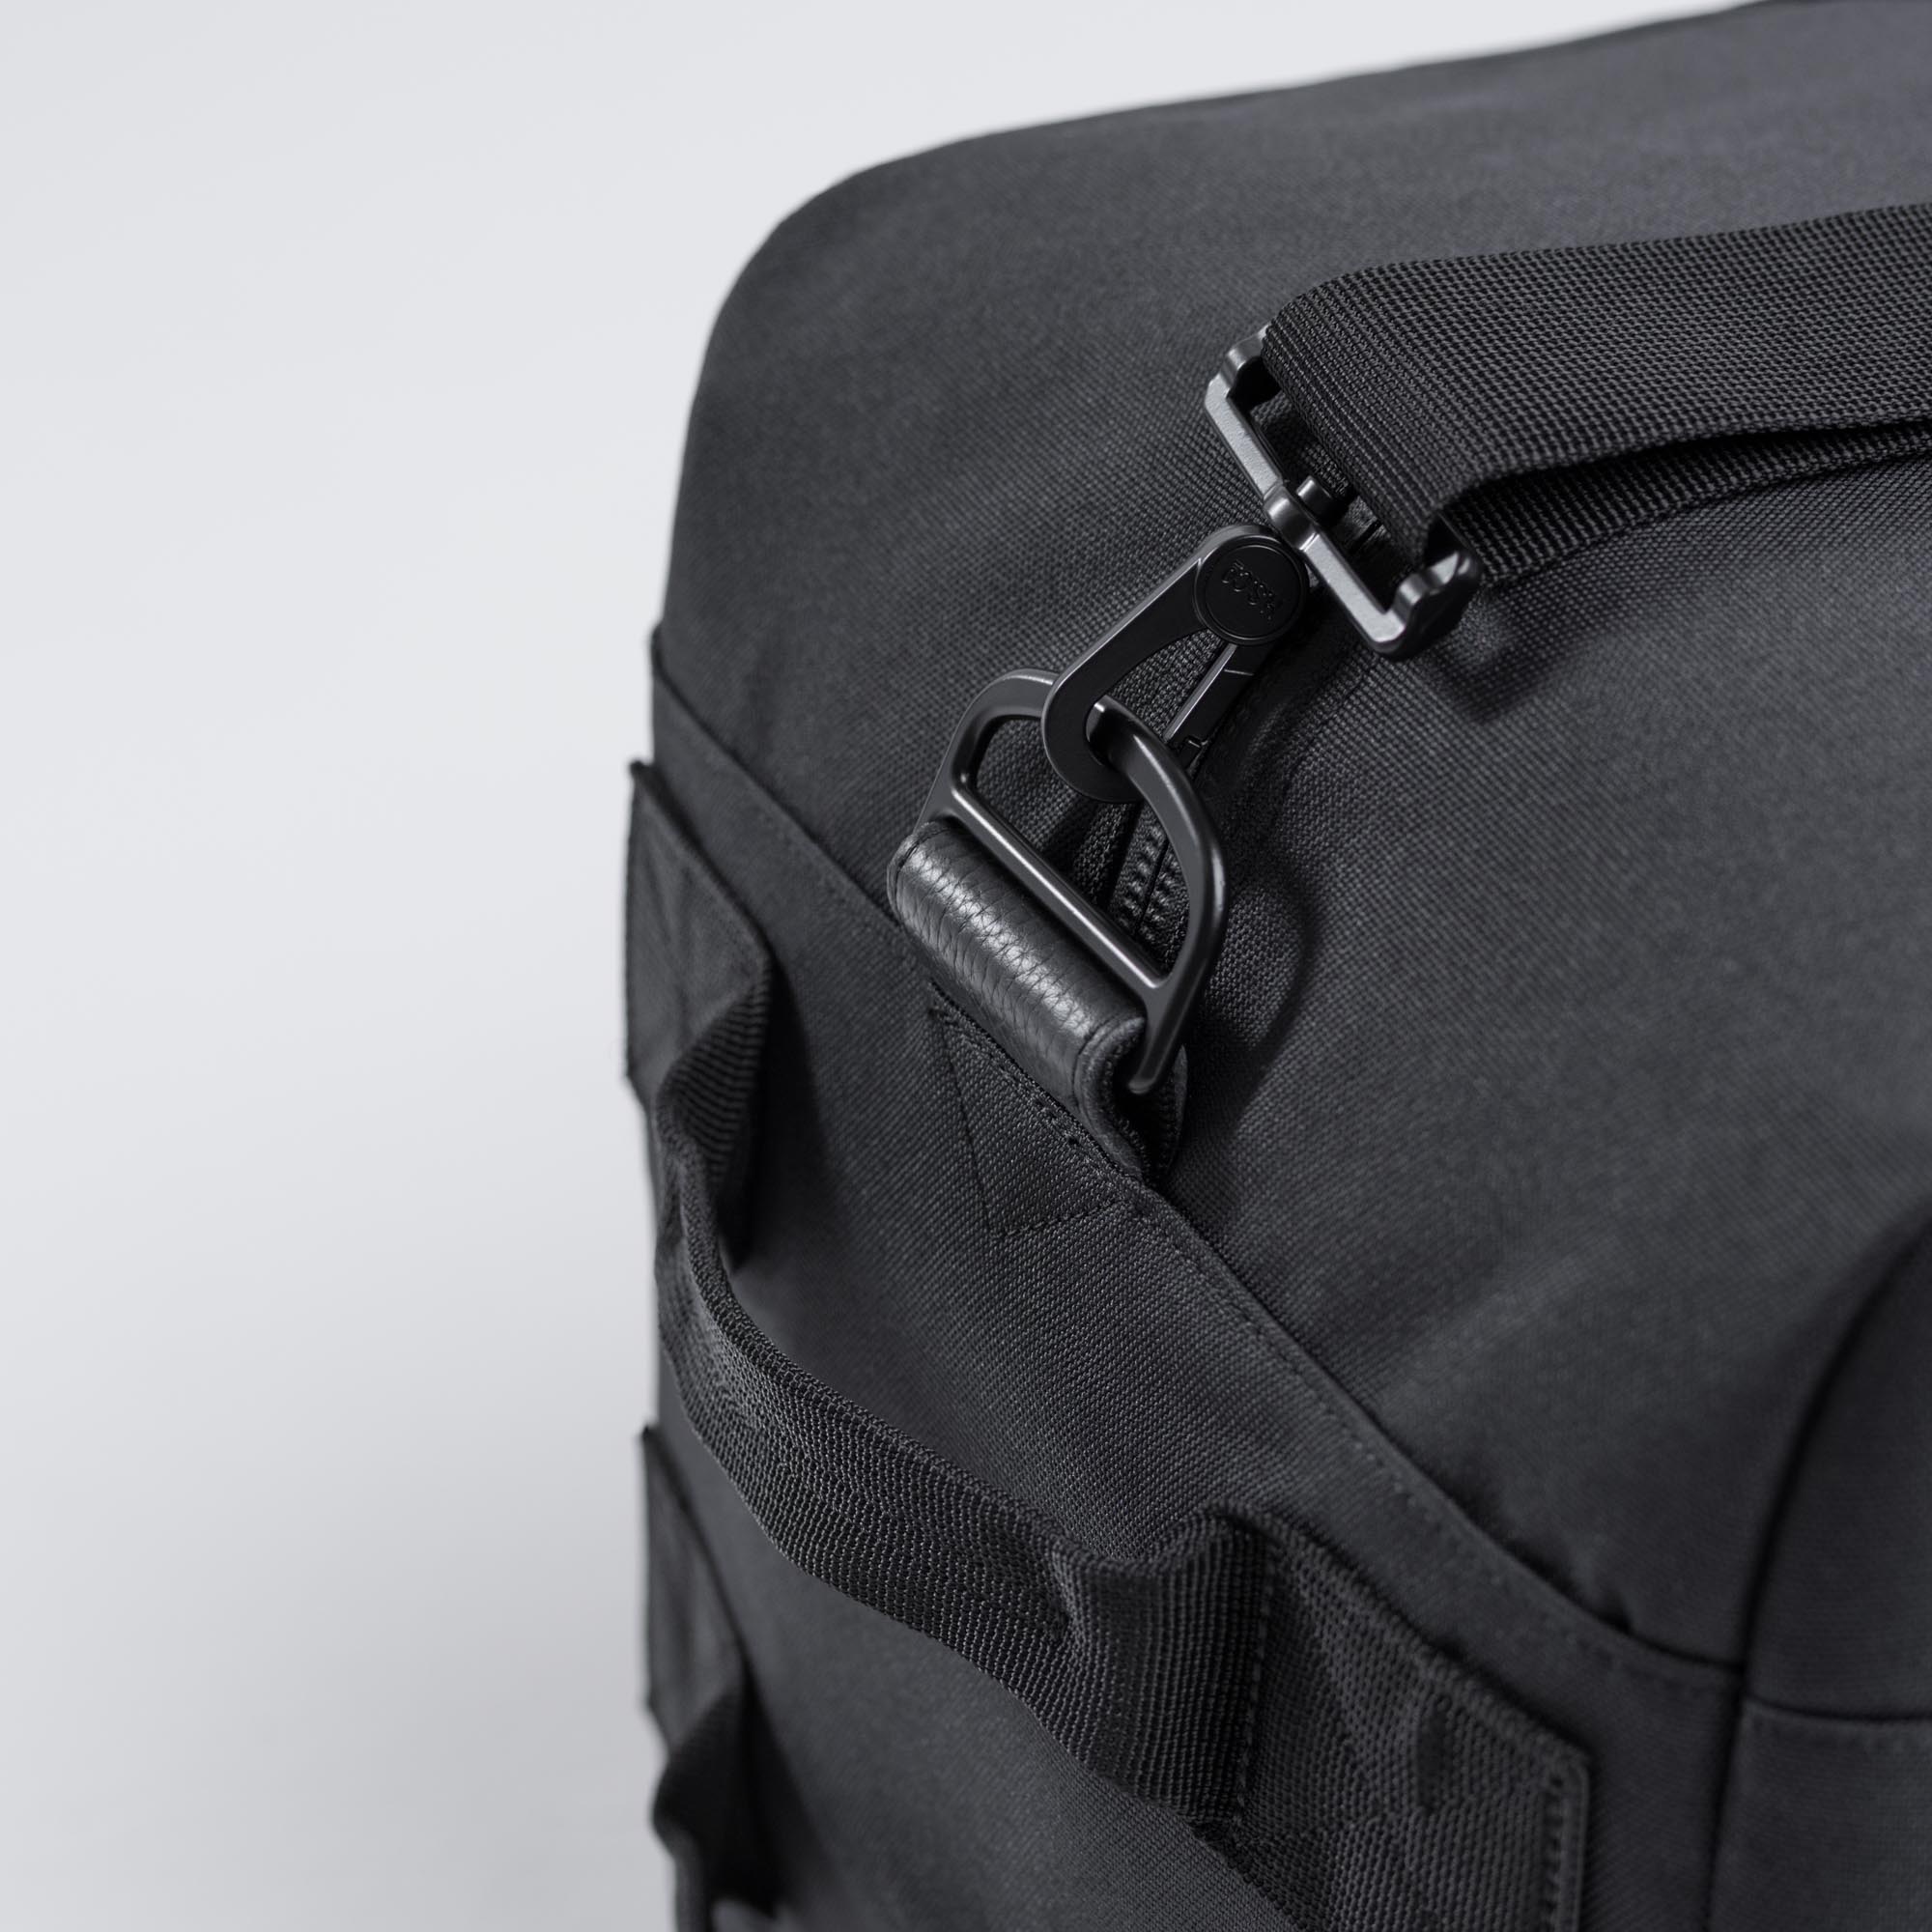 Outfitter Luggage | Herschel Supply Company